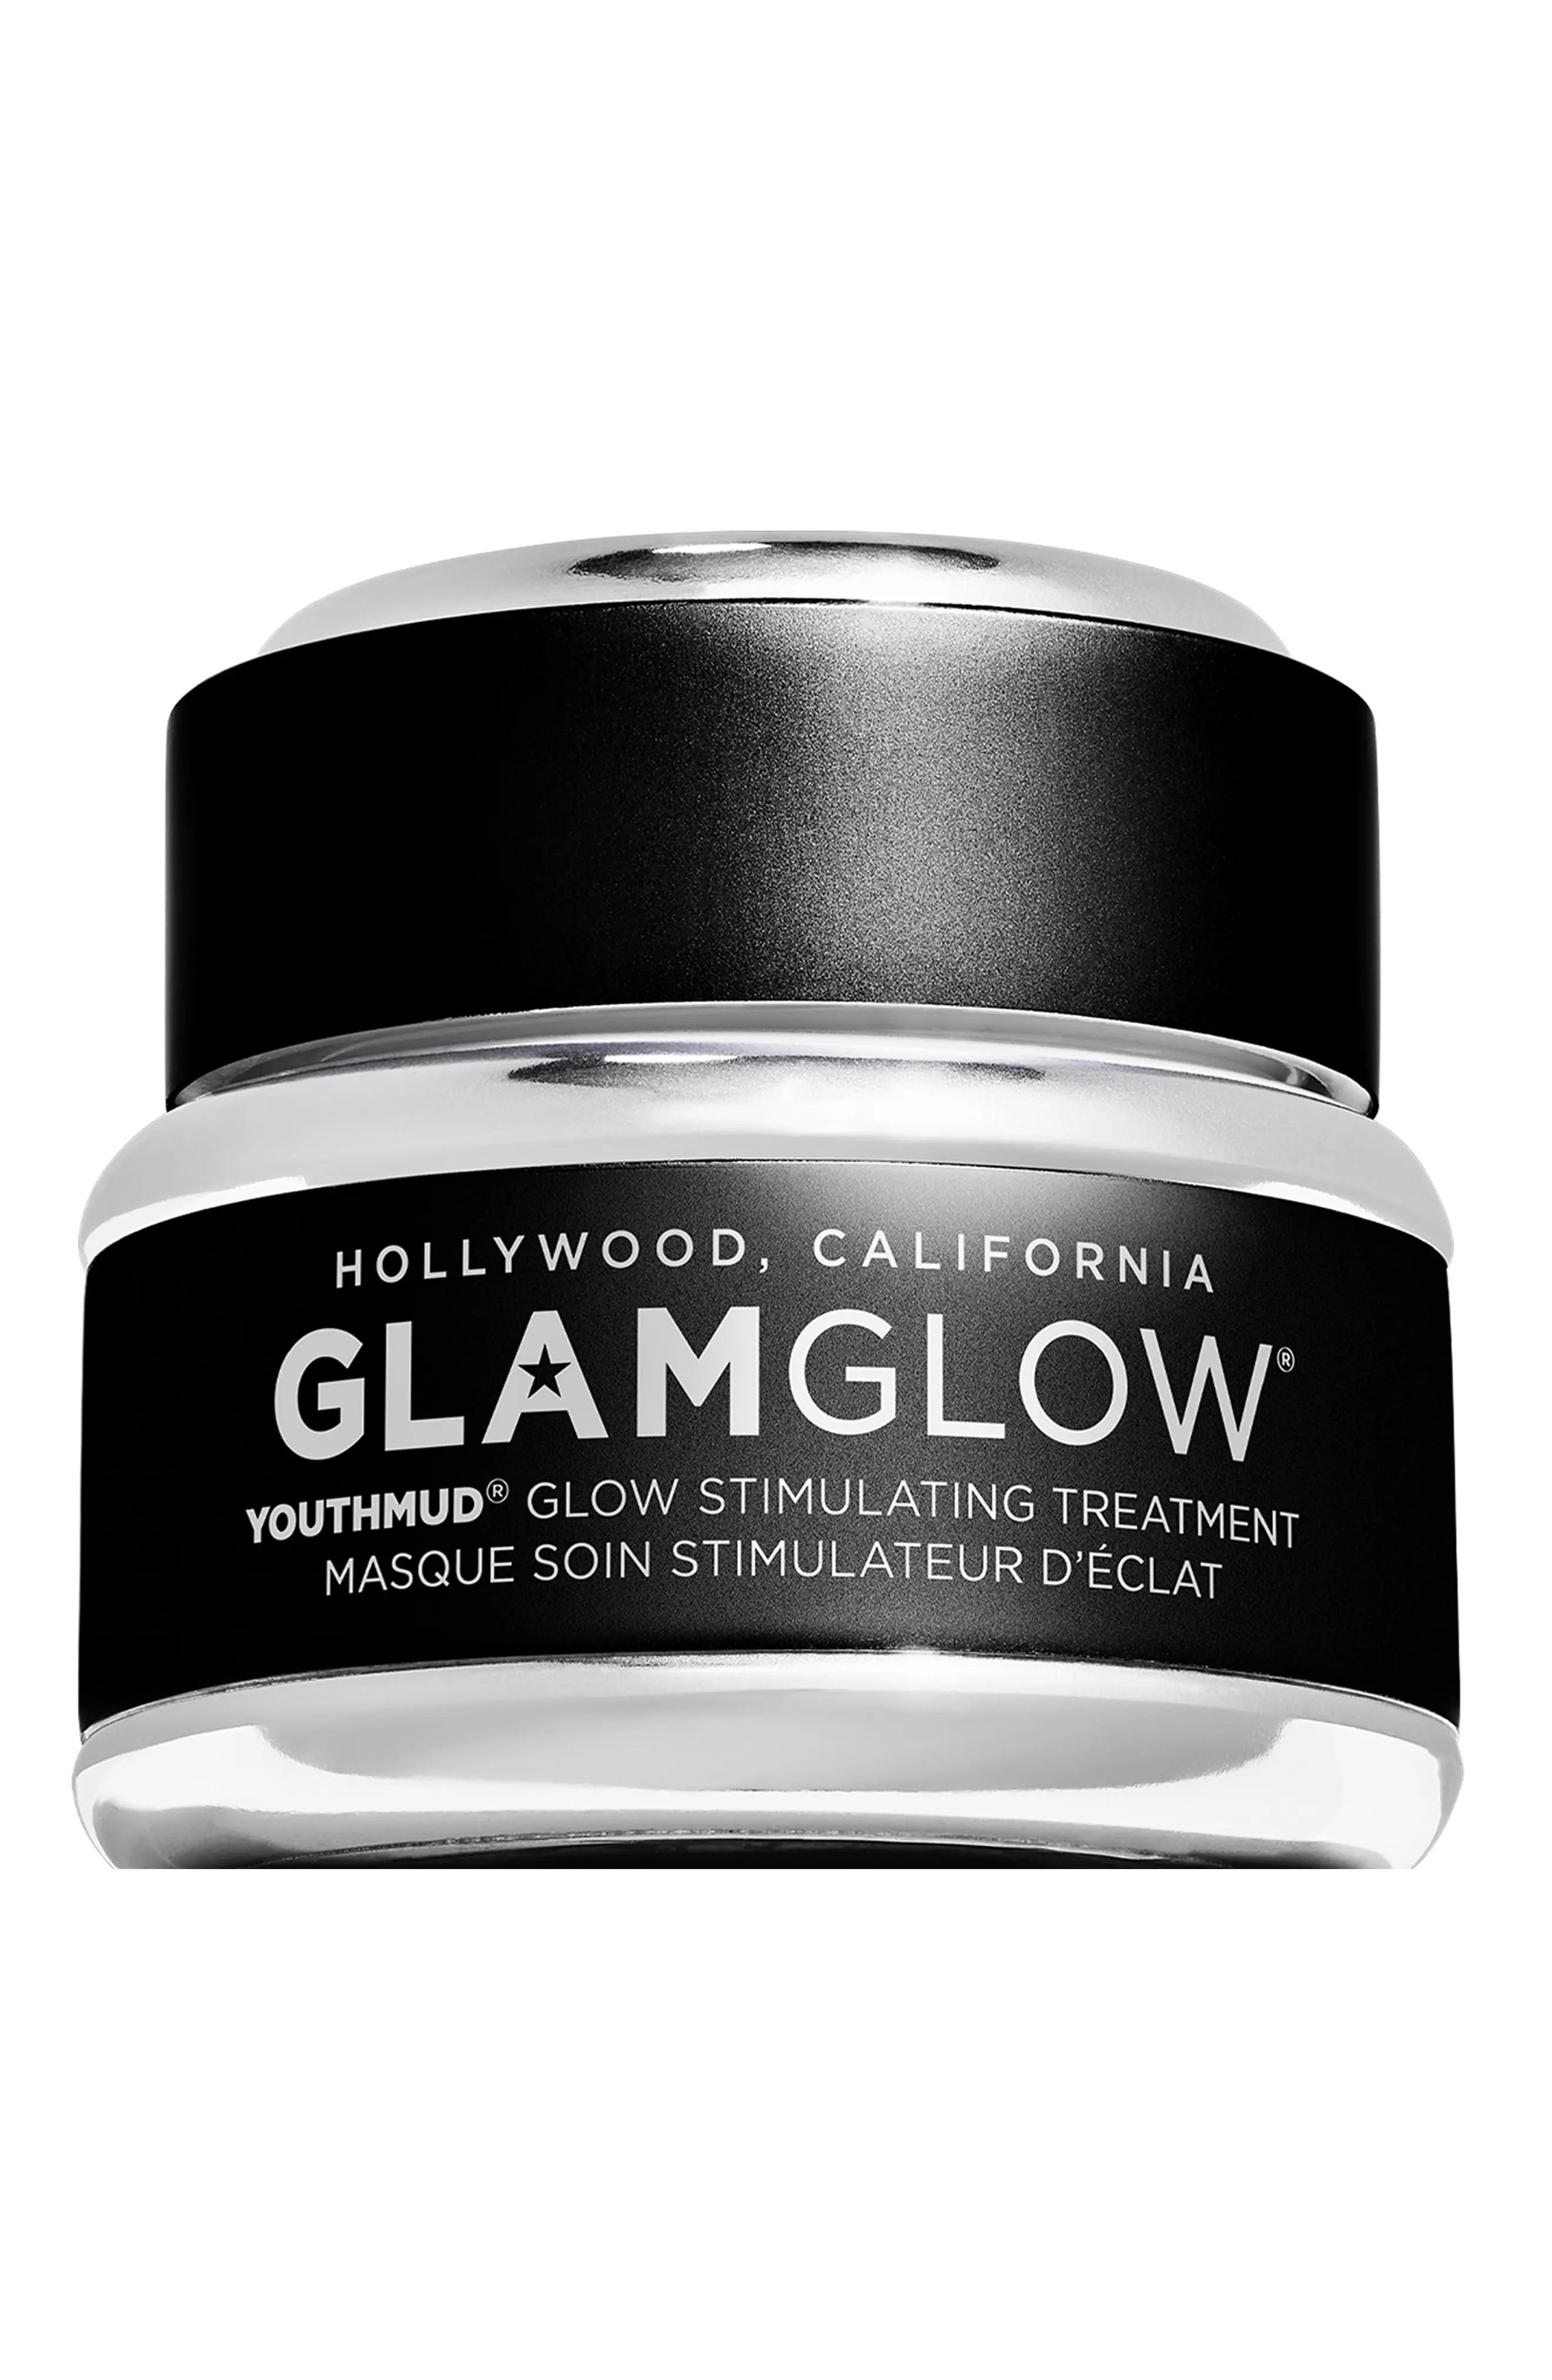 GLAMGLOW(R) YOUTHMUD(R) Glow Stimulating Treatment Mask, Size 1.7 Oz at Nordstrom | Nordstrom